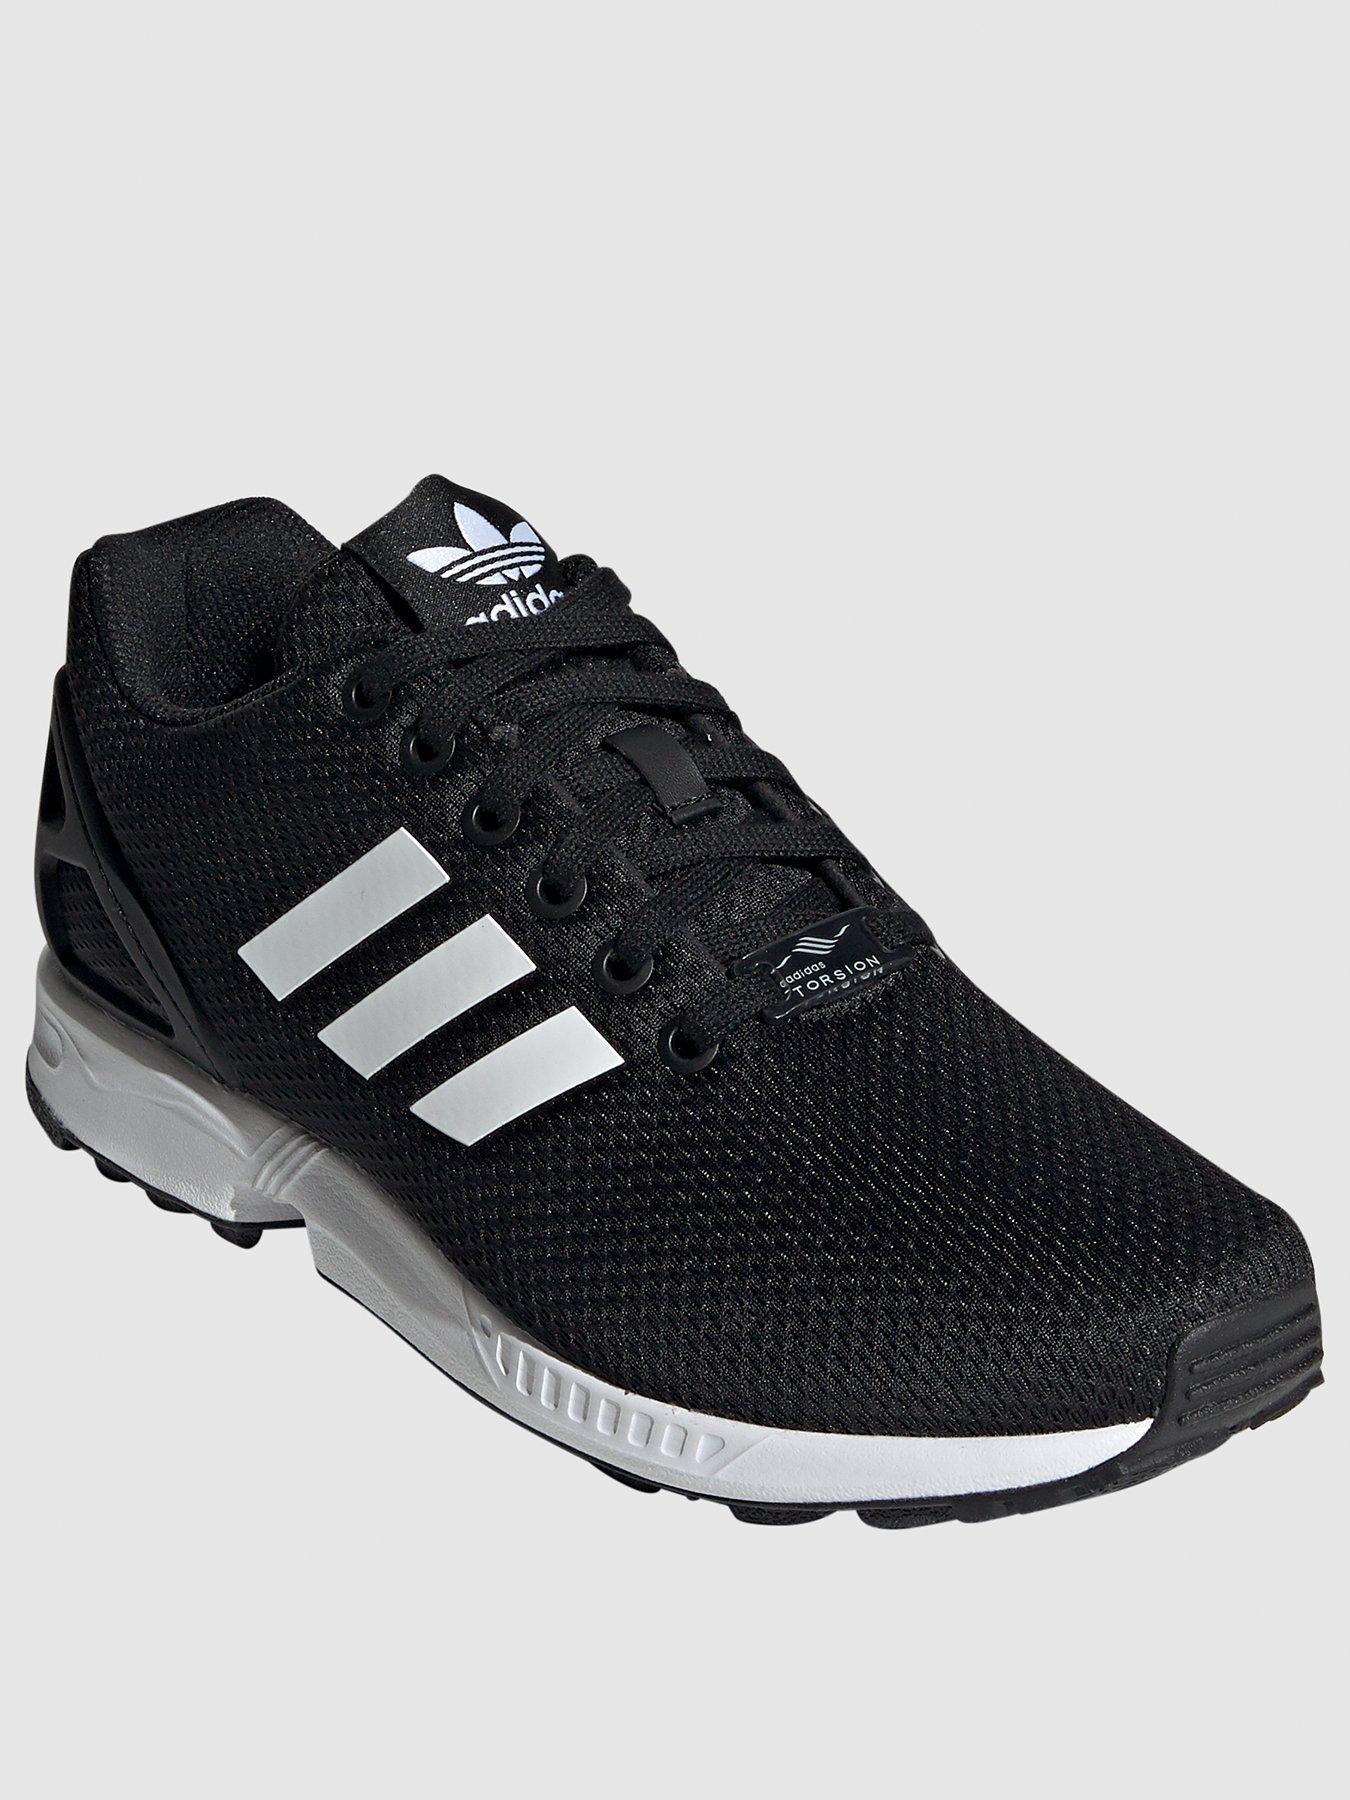 adidas zx flux trainers size 6